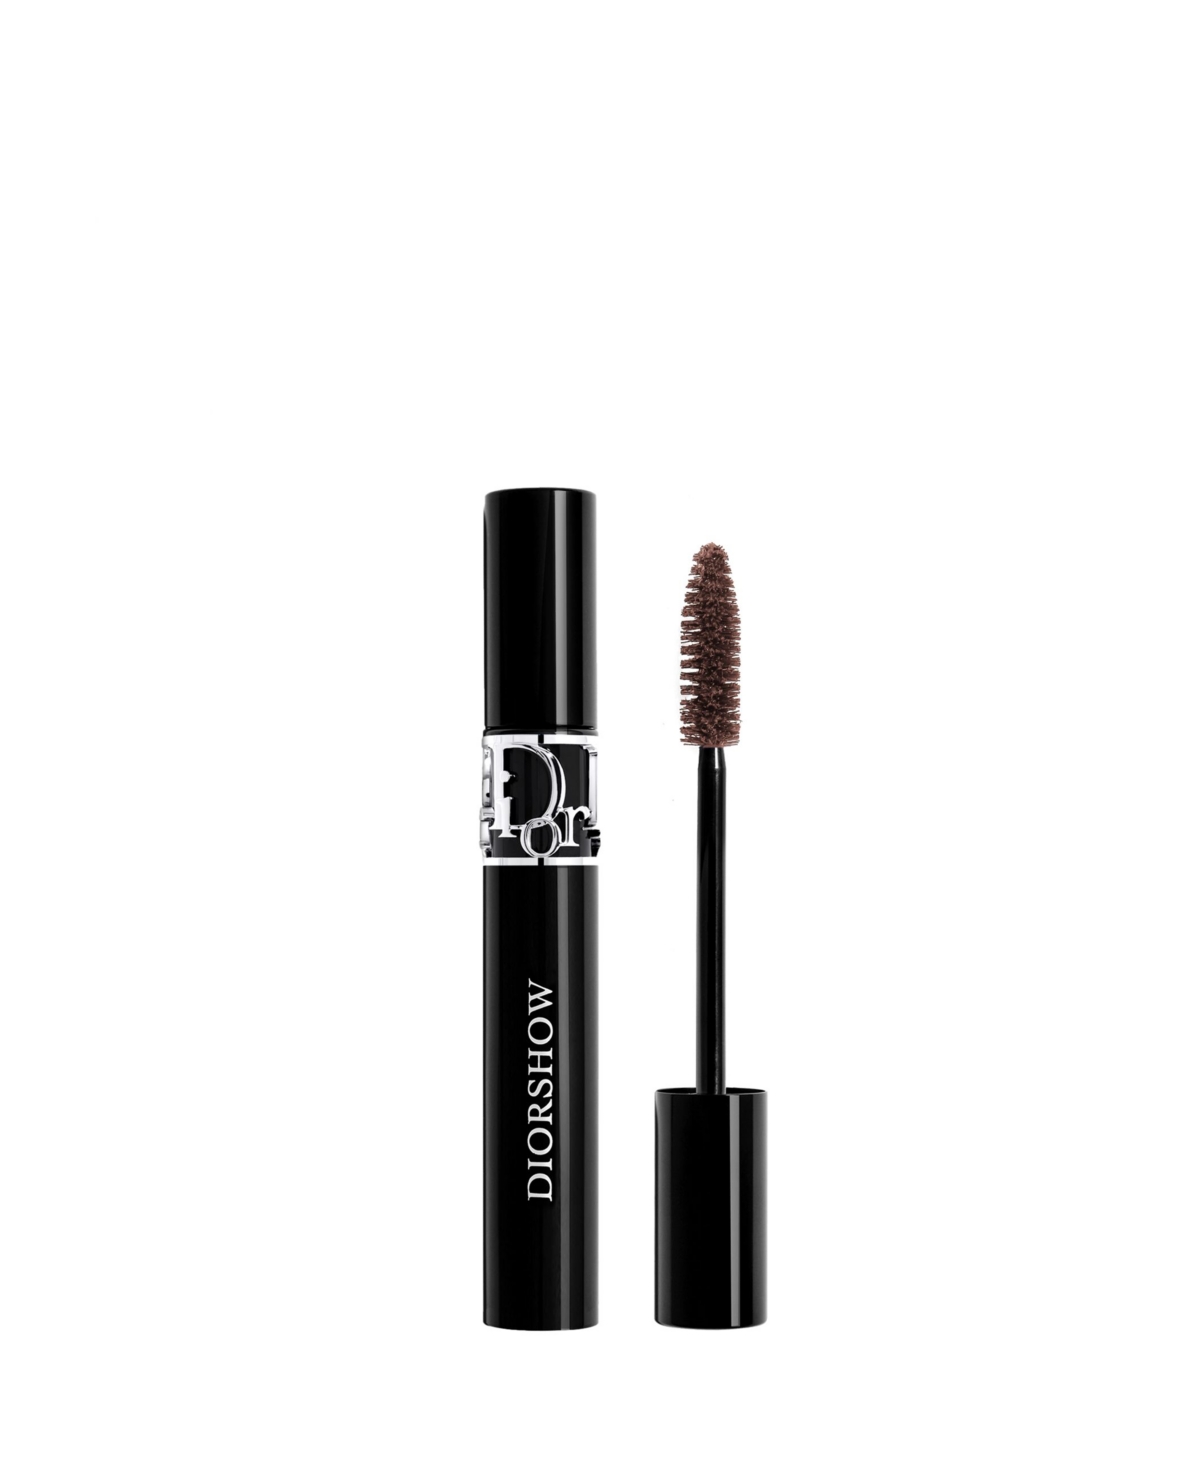 Dior Show 24h Buildable Volume Mascara In Brown (an Essential Brown)